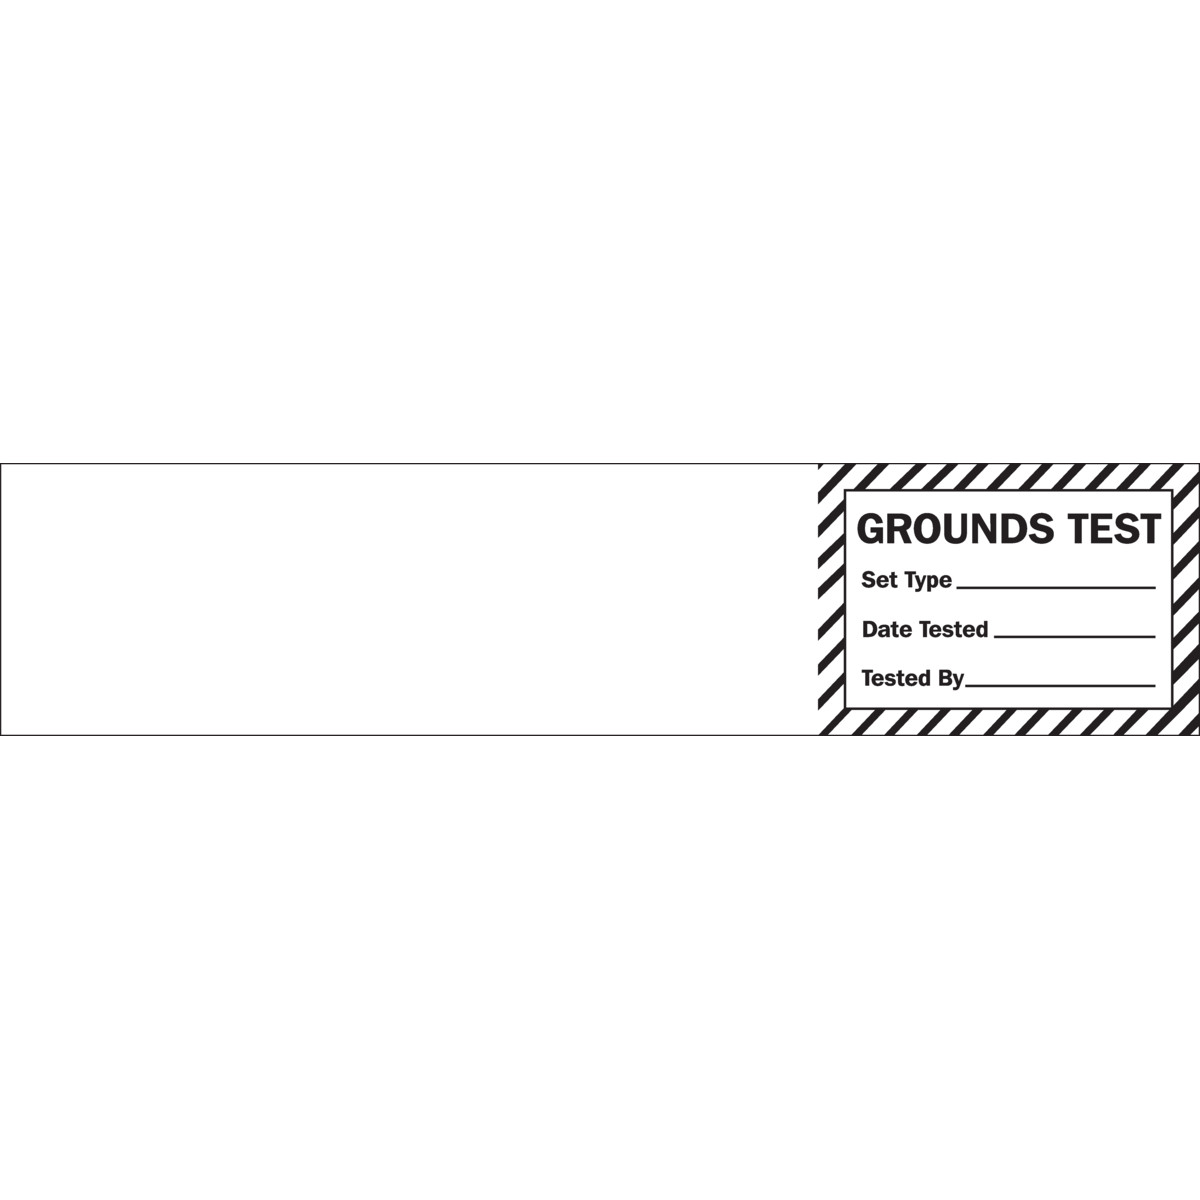 Grounds Test Set Type Label